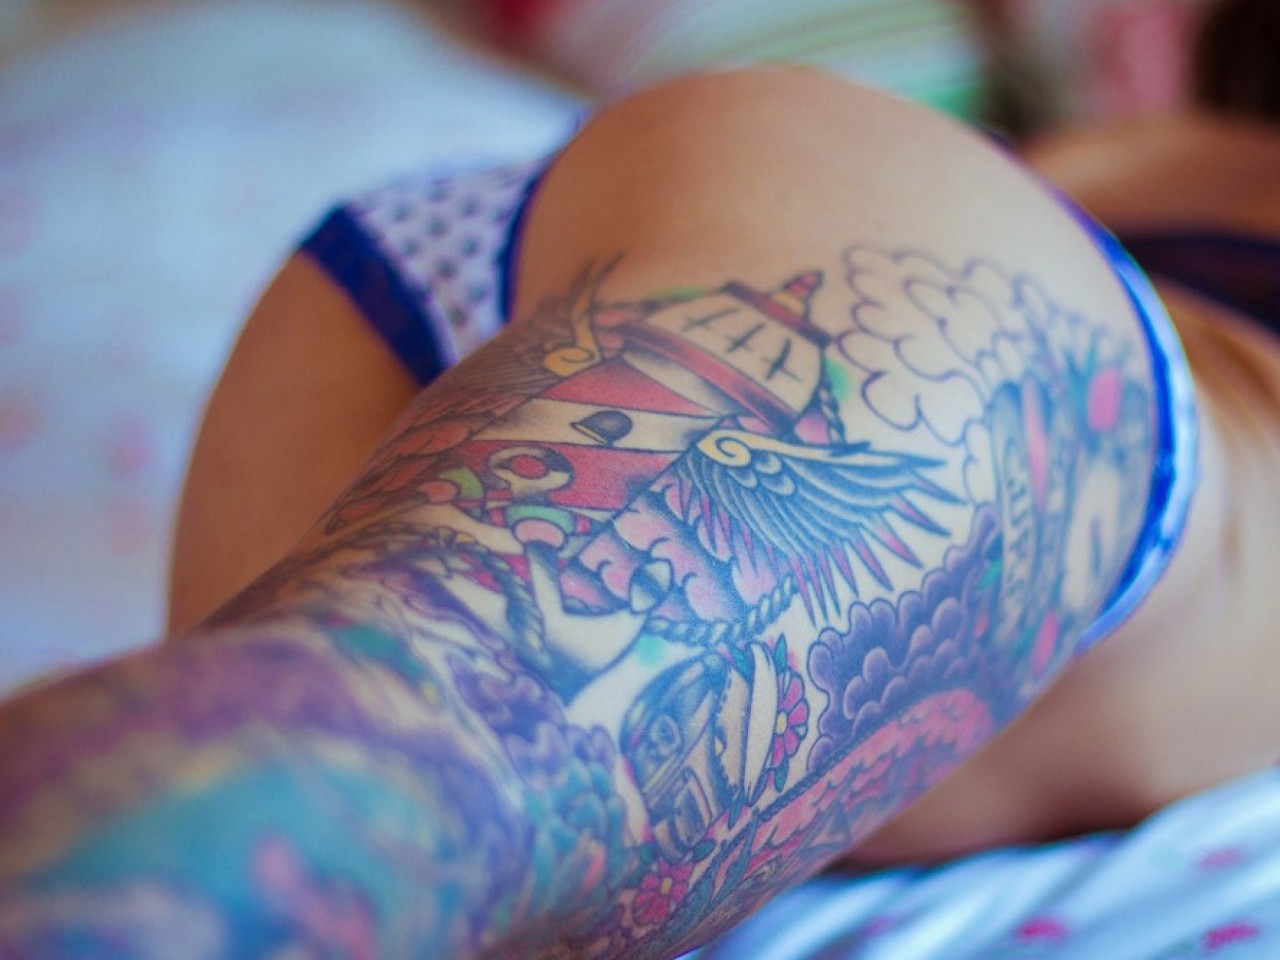 Girls with tattoos on their ass